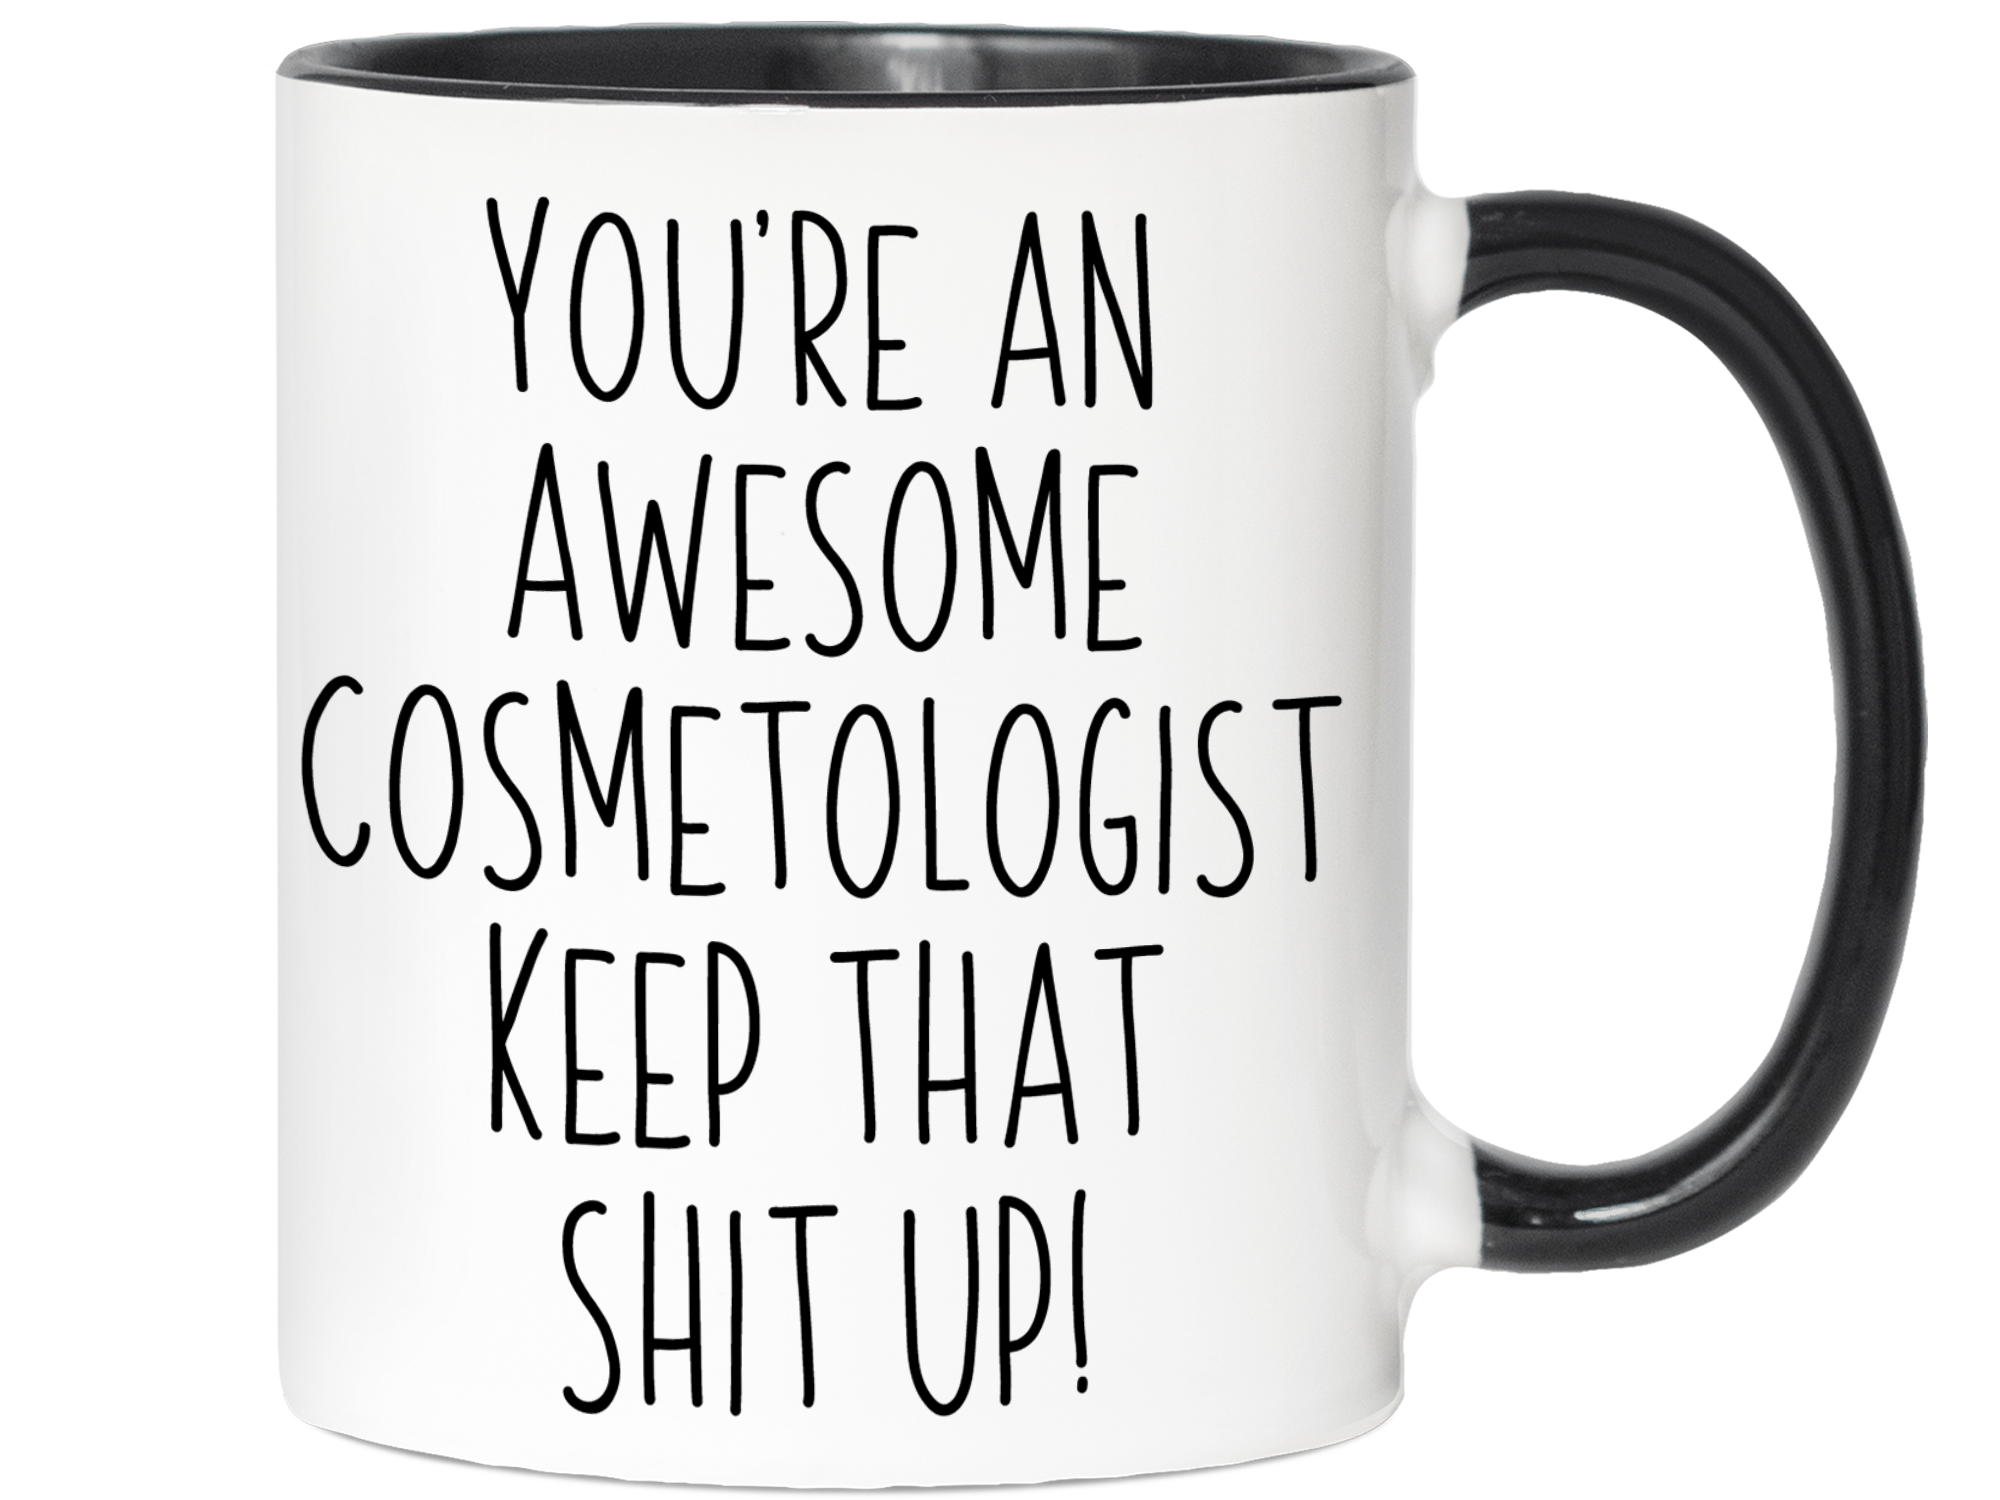 Gifts for Cosmetologists - You're an Awesome Cosmetologist Keep That Shit Up Coffee Mug - Cosmetologist Graduation Gift Idea